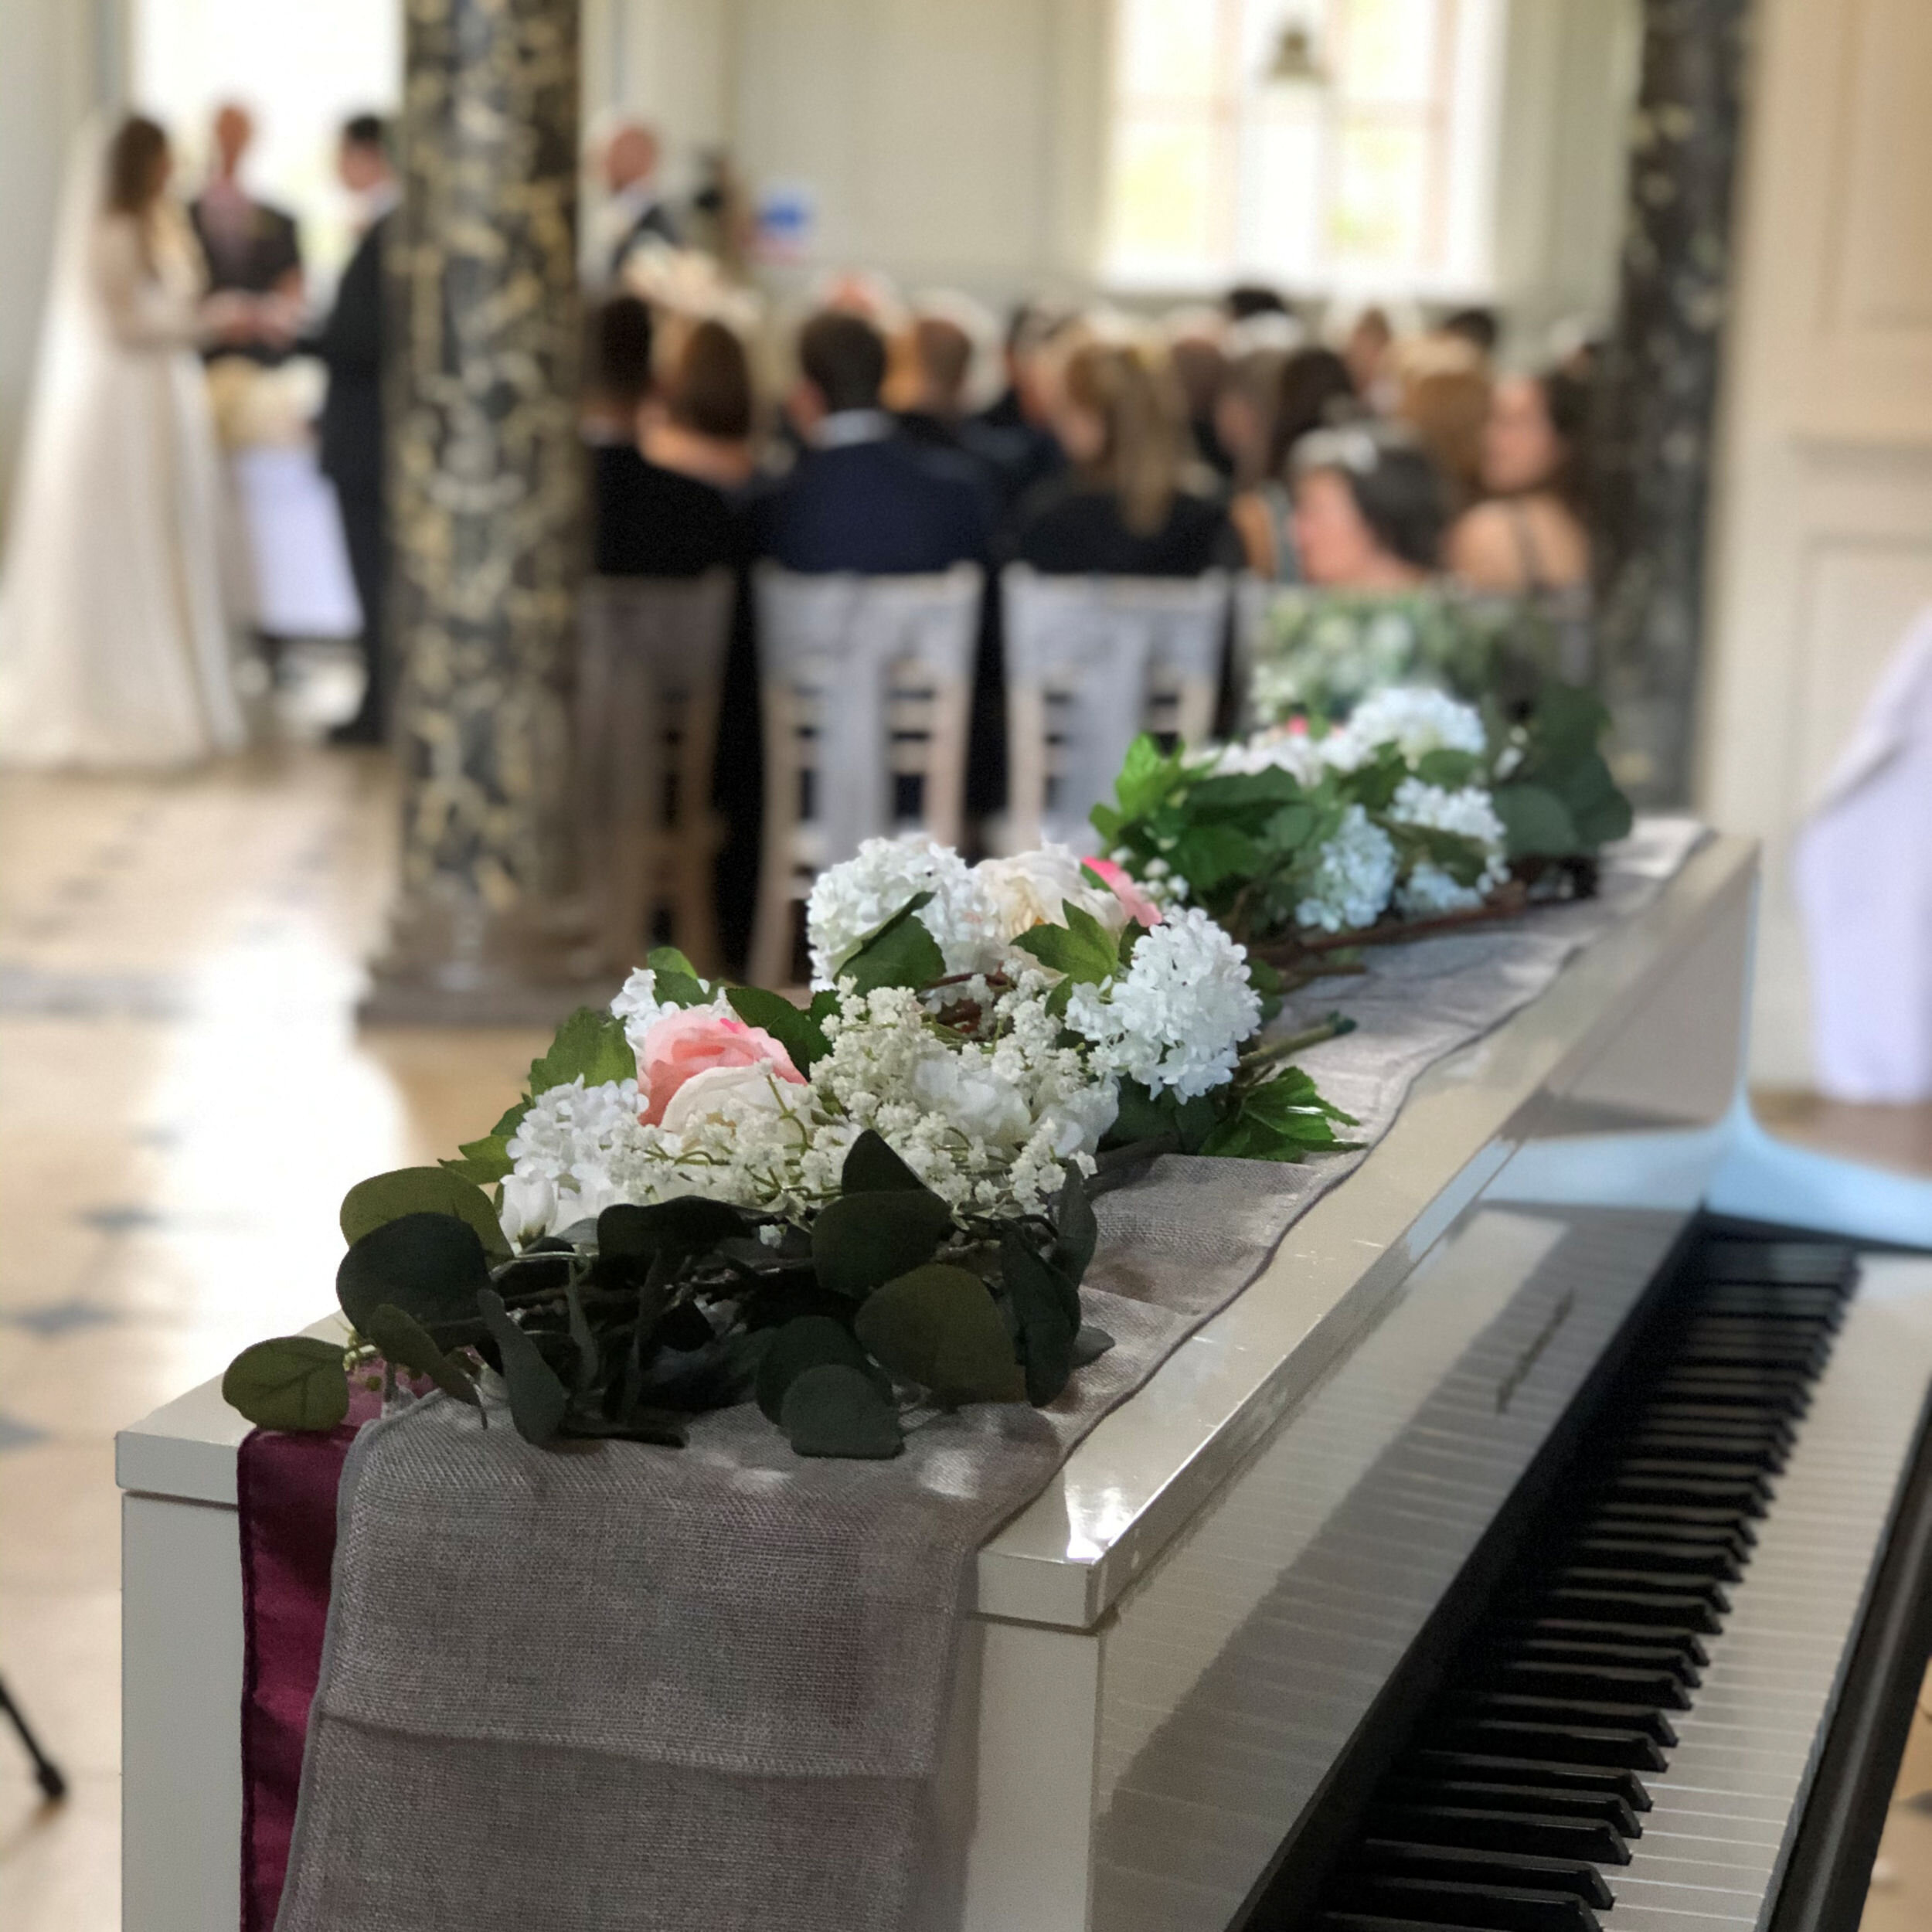 Ceremony, drinks reception and wedding breakfast at the glorious Chicheley Hall